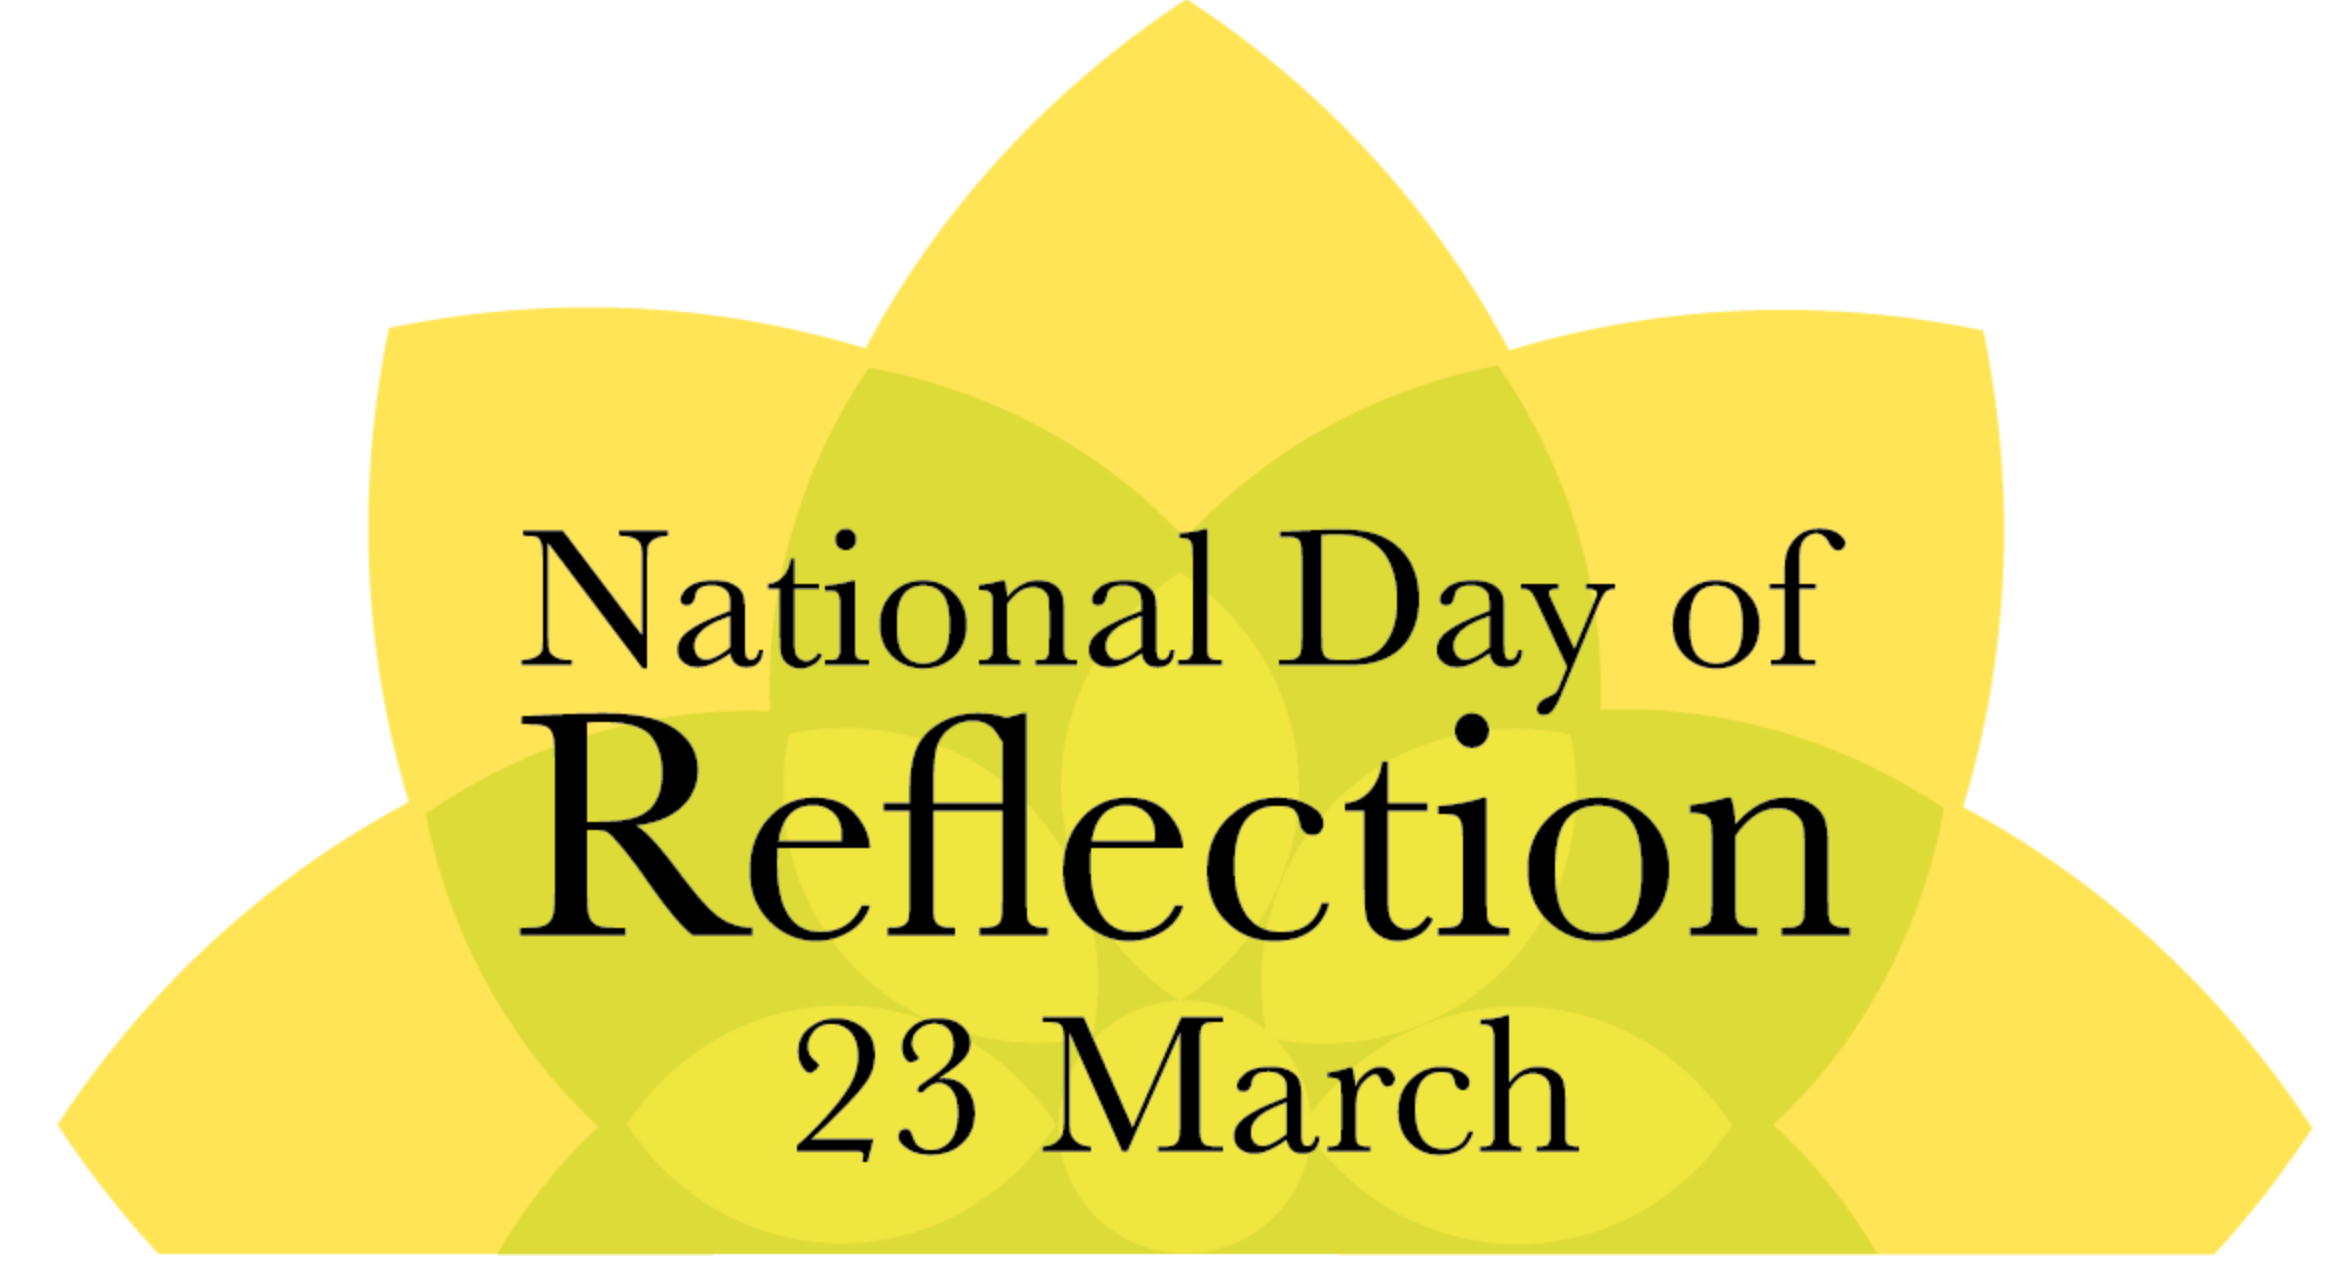 Get Involved in the National Day of Reflection 2021 for North Staffs